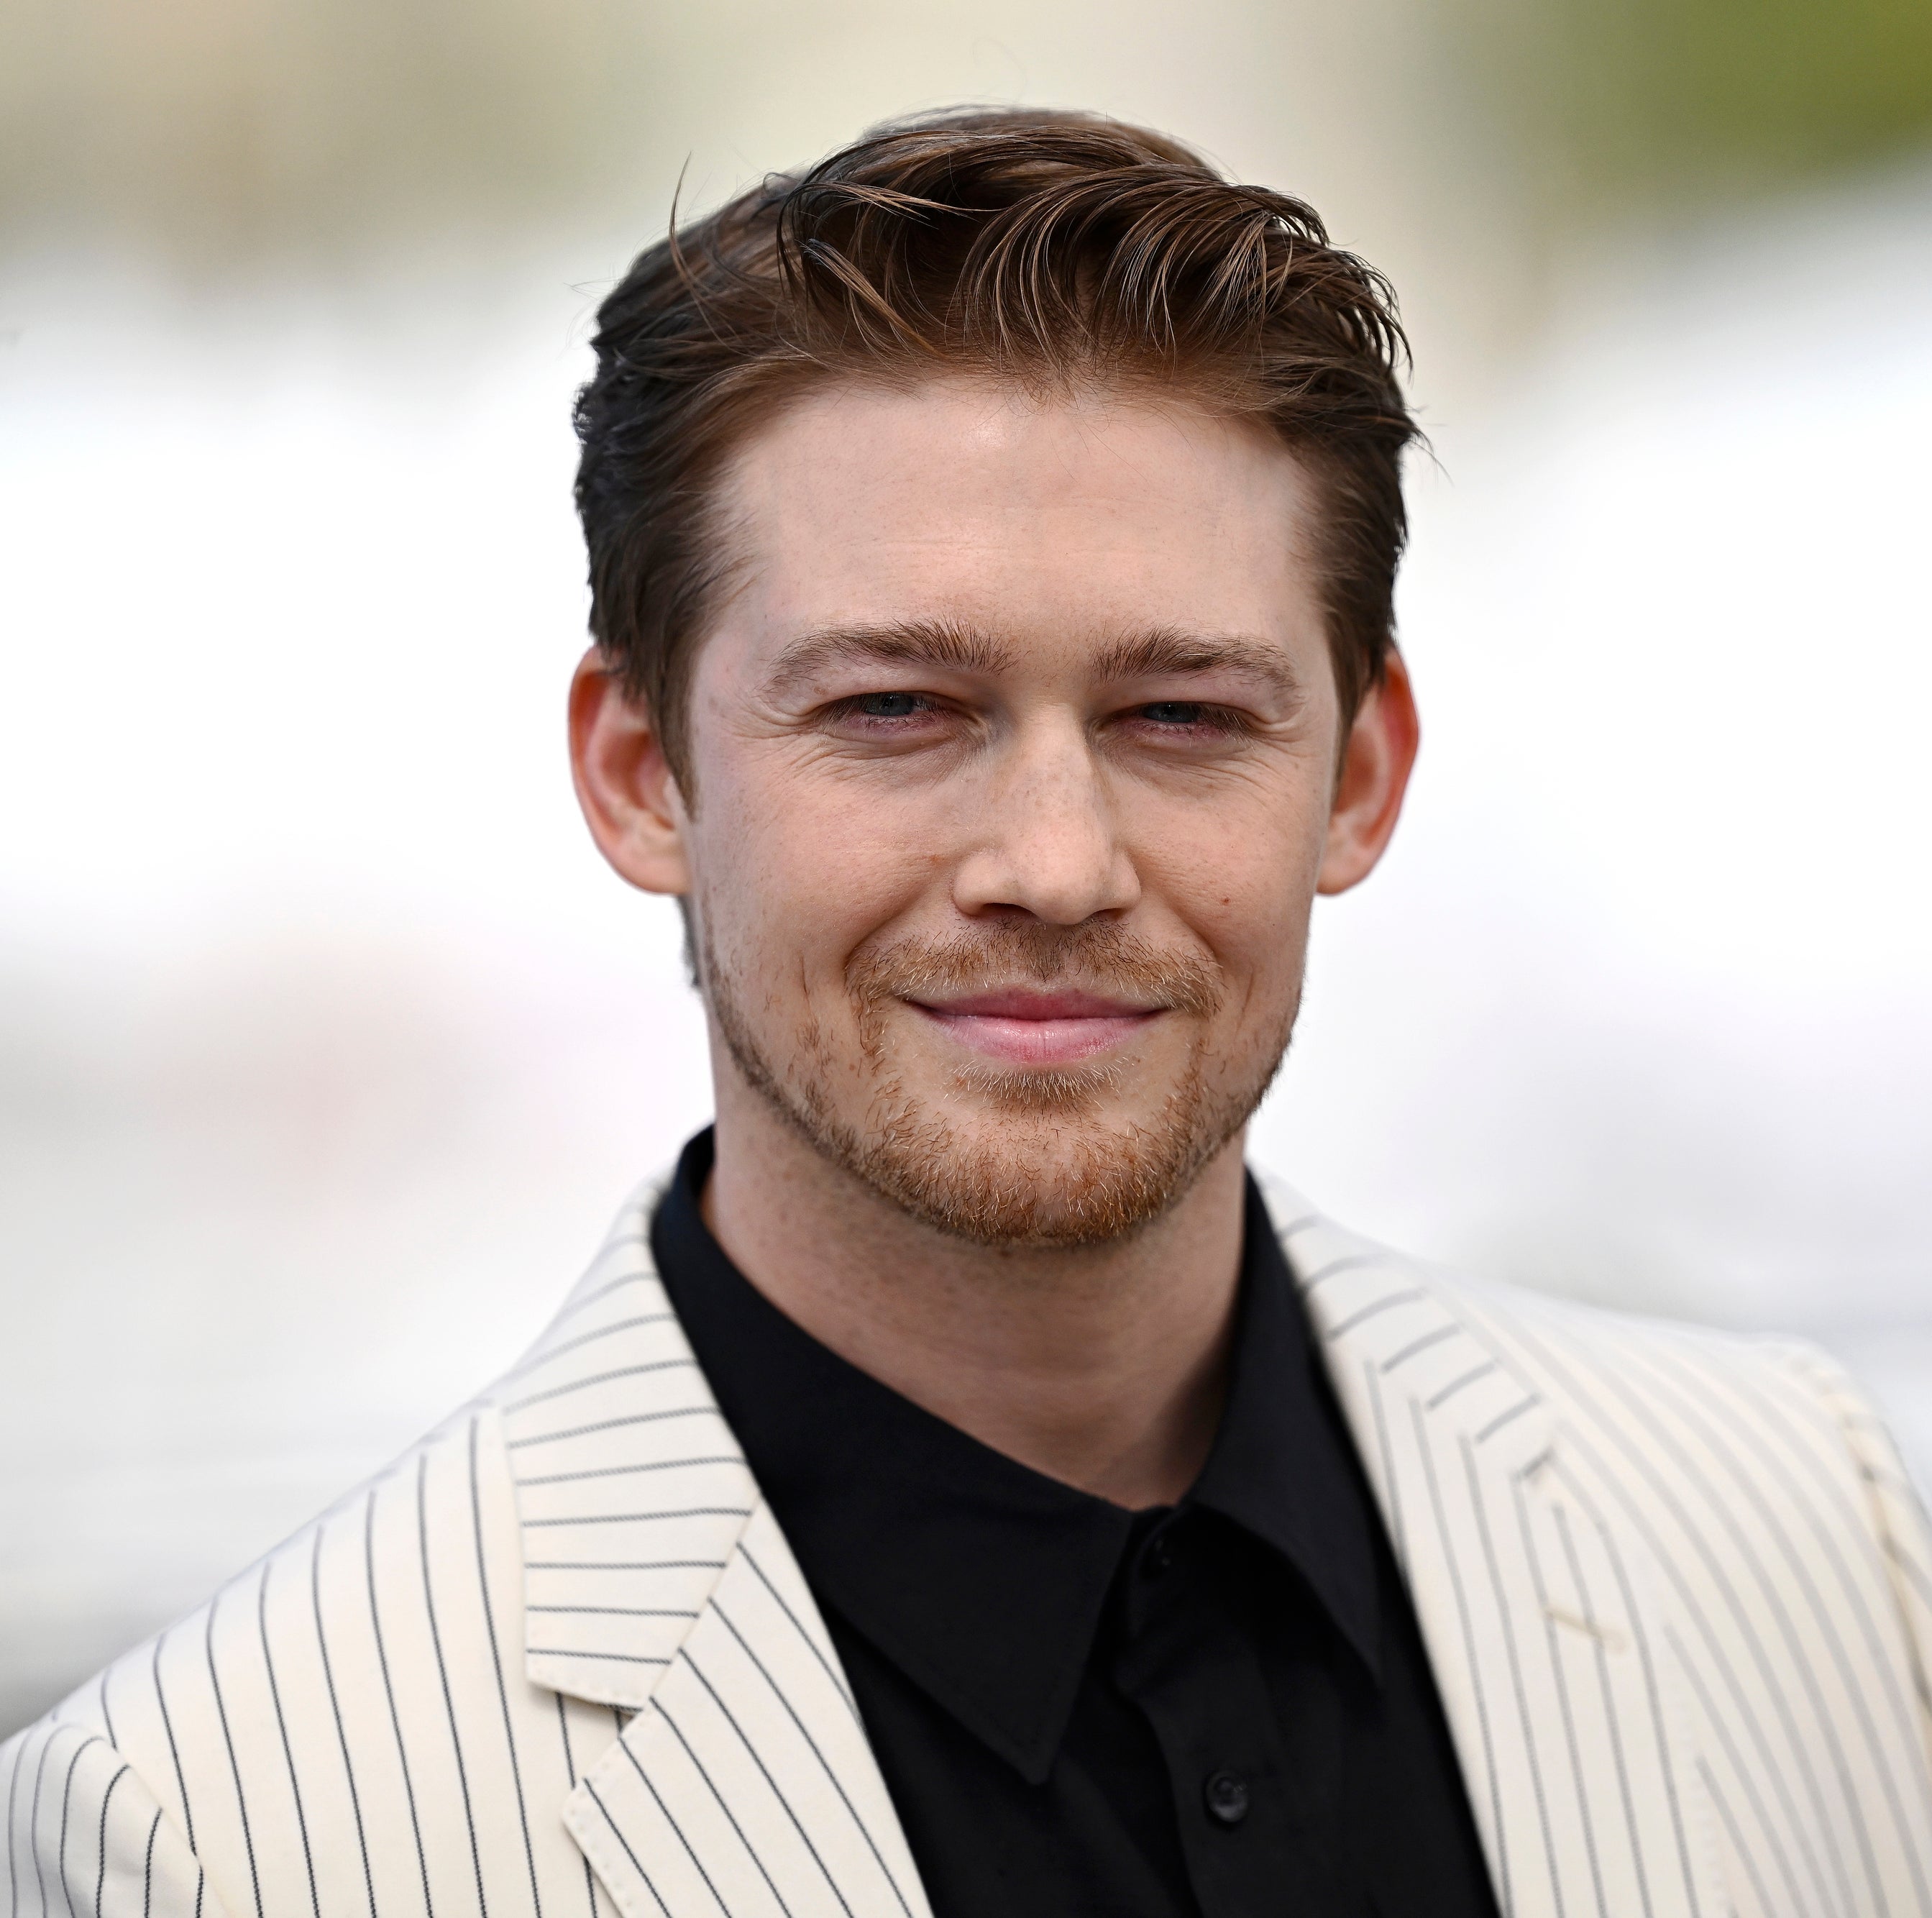 Joe Alwyn is pictured outdoors, wearing a light-colored, pinstriped jacket and a dark shirt, smiling gently with a blurred background